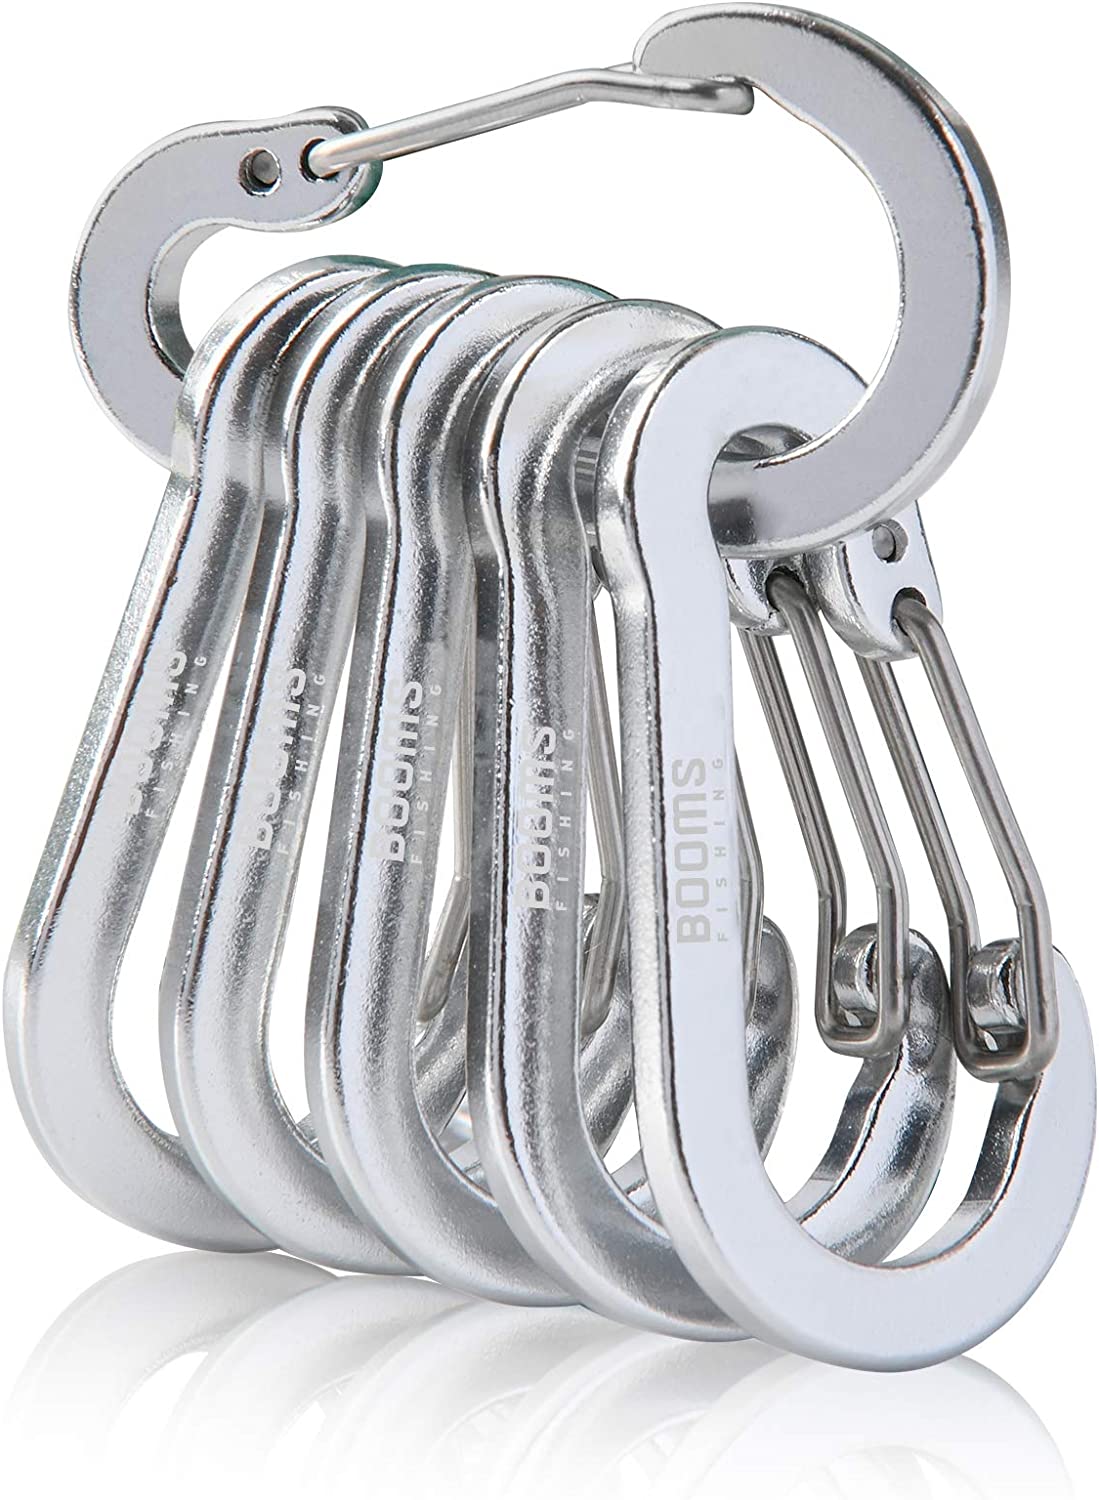 Booms Fishing CC1 Multi-Use Carabiner Clip, 6 Pack Small Caribeener Clips, Mini Keychain Caribeaner Clip 2 inch, Aluminum D Ring Carabiners